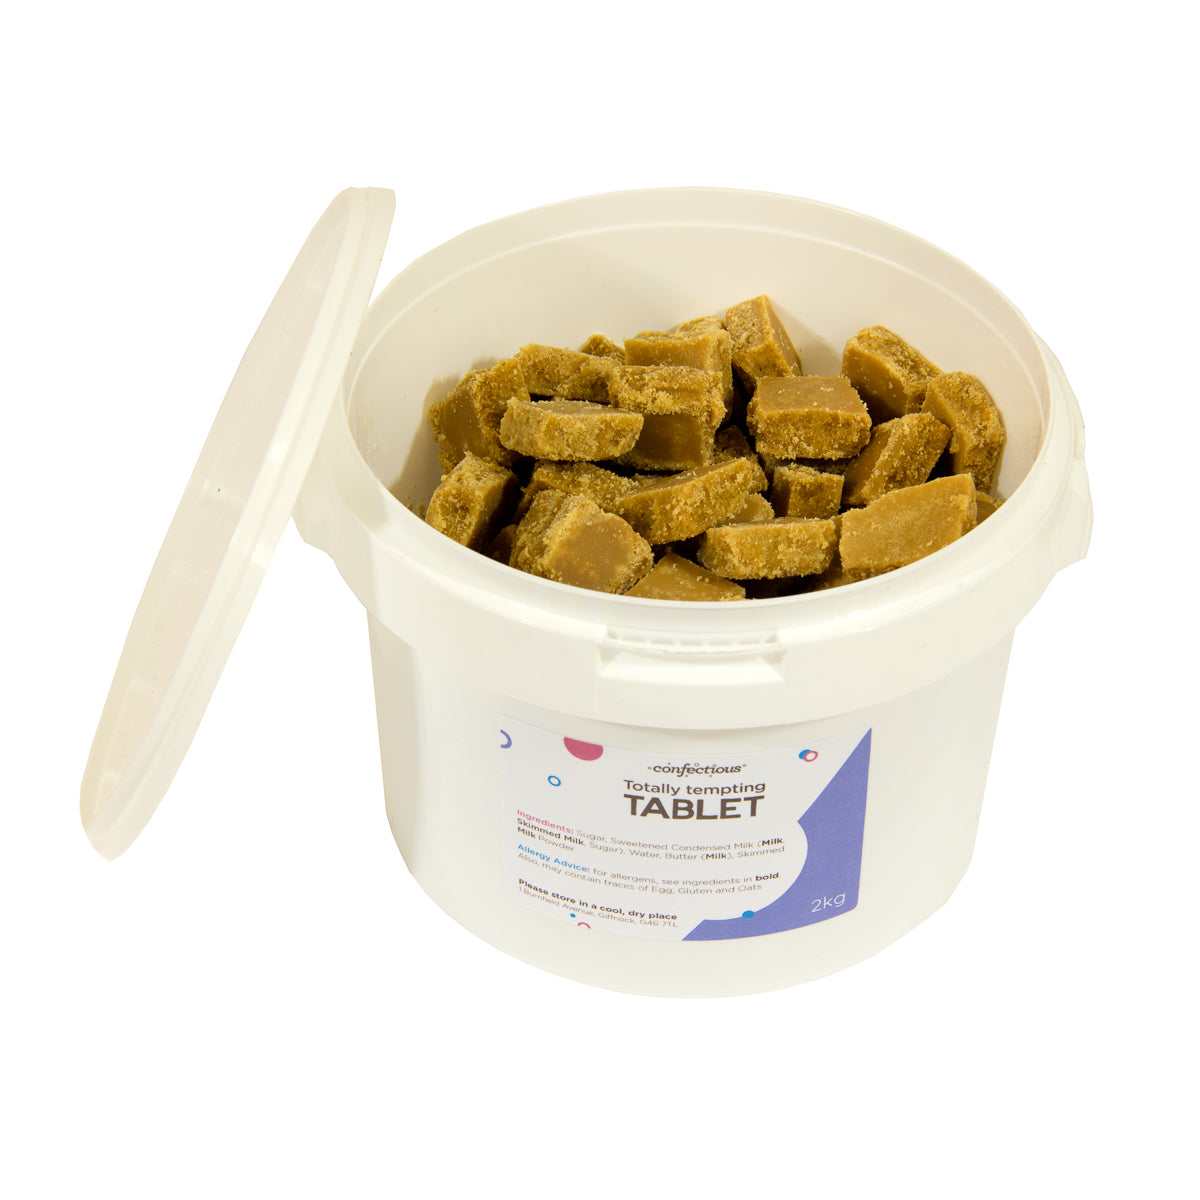 Scottish Totally Tempting Tablet 2kg Tub Confectious